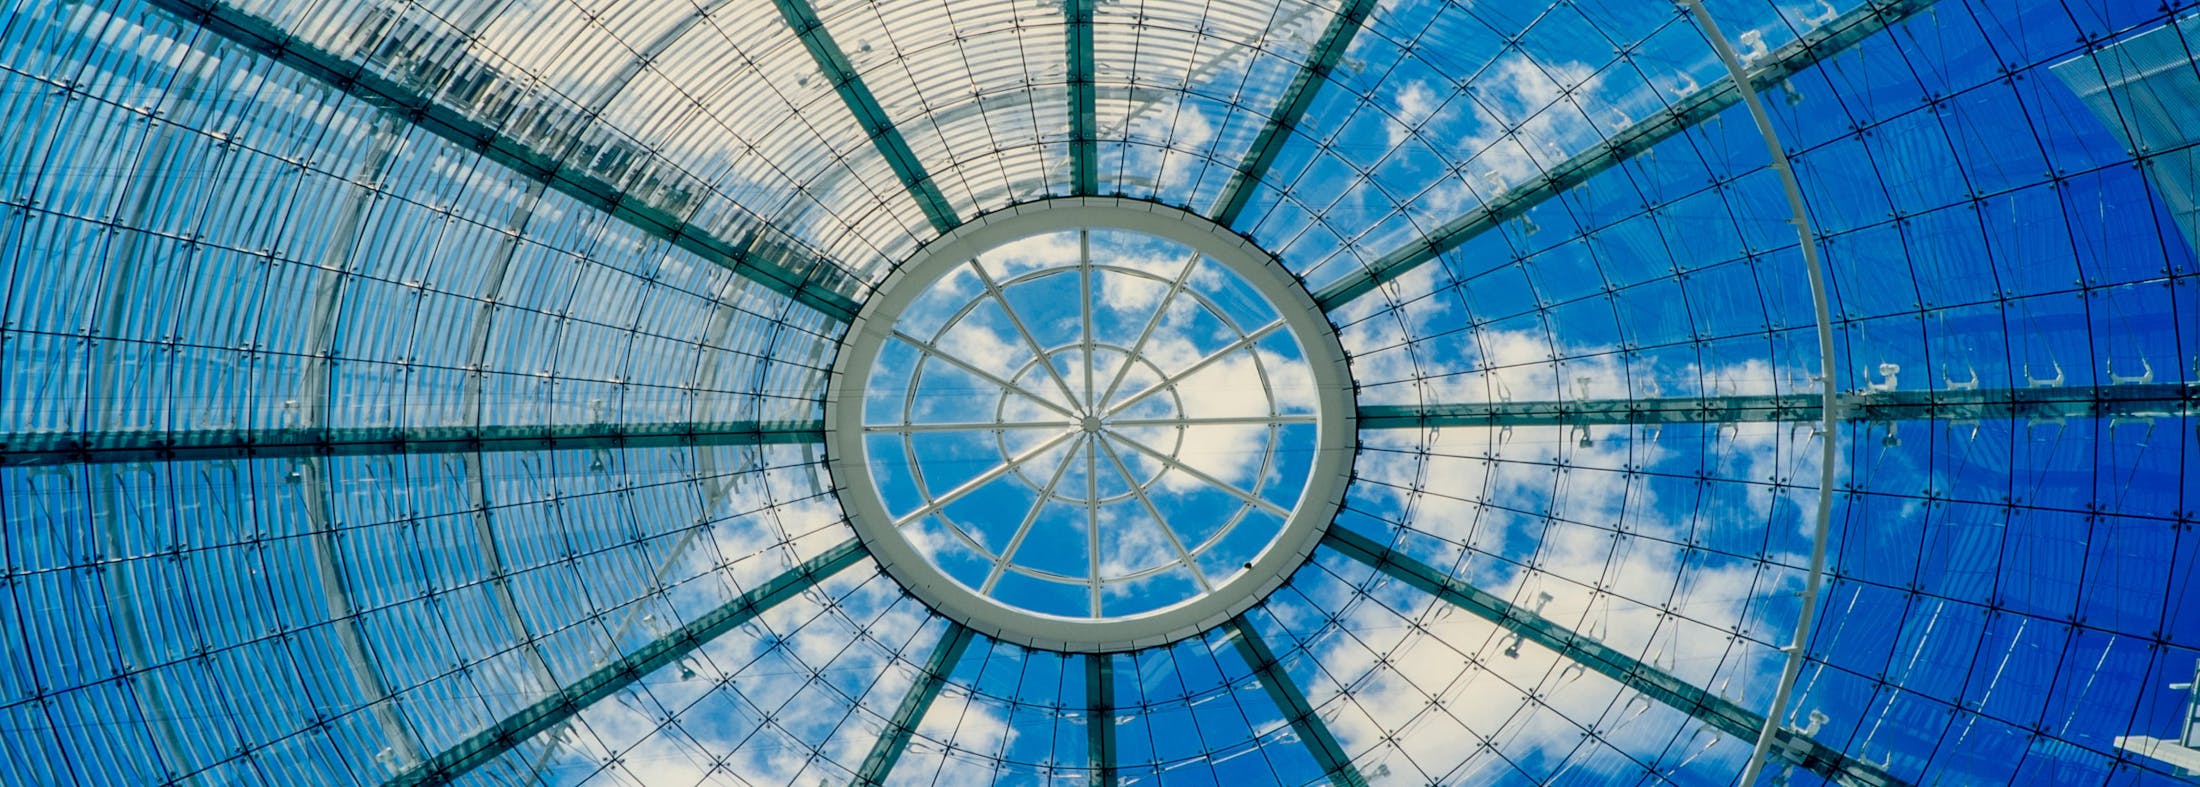 artistic photo of a roof with glass